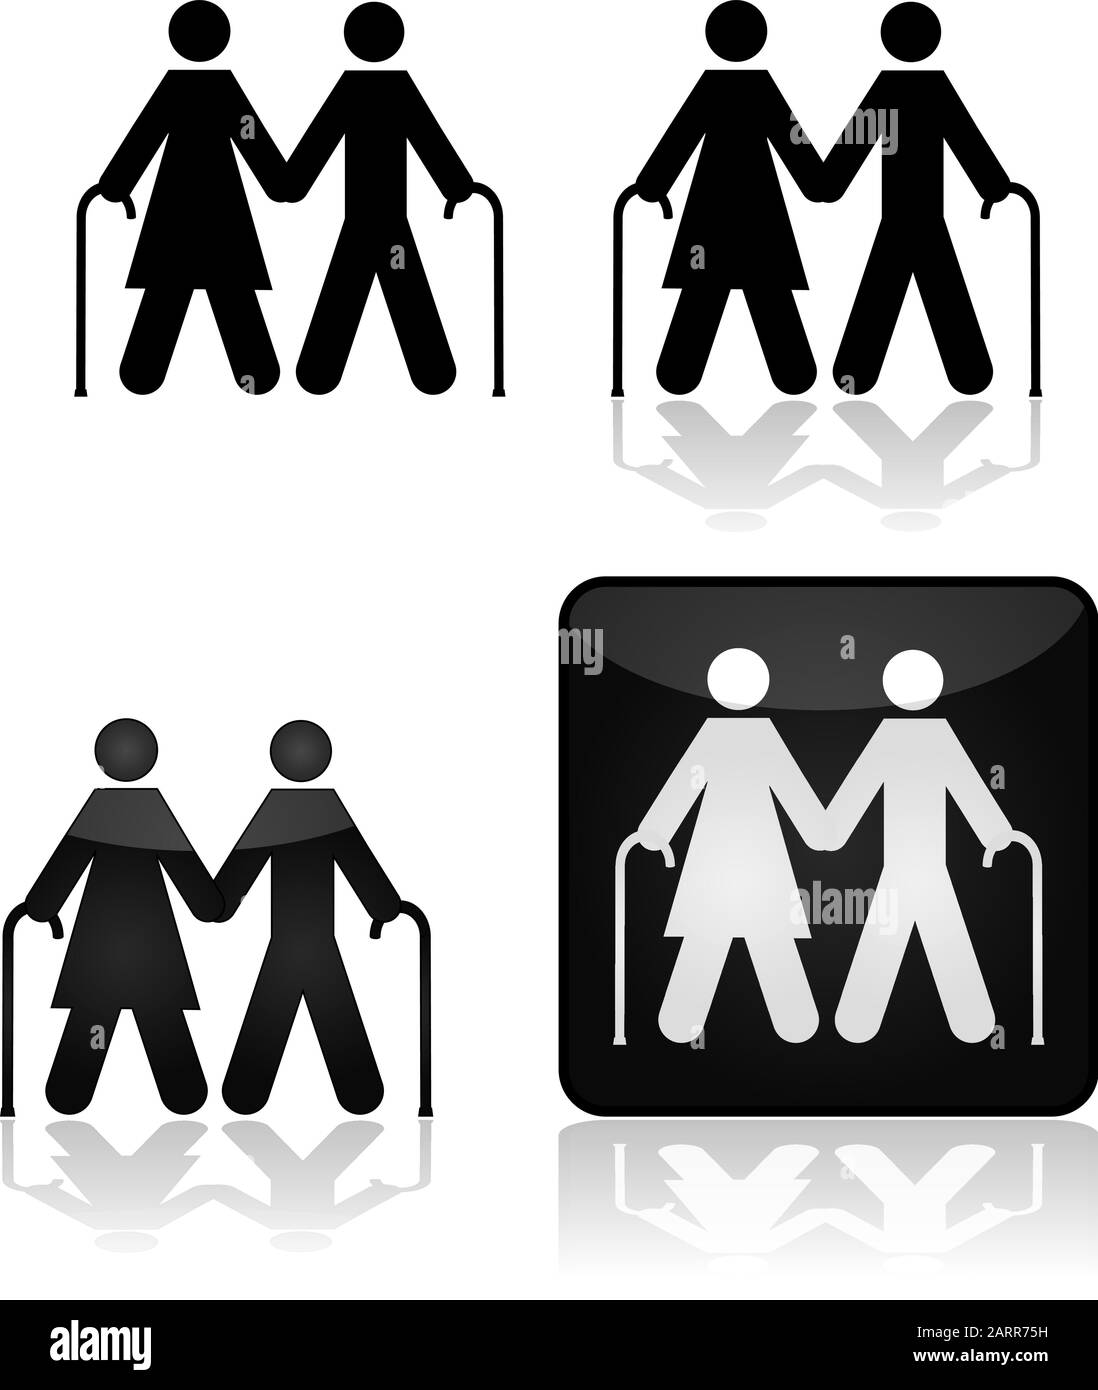 Concept illustration showing an older couple walking with canes Stock Vector